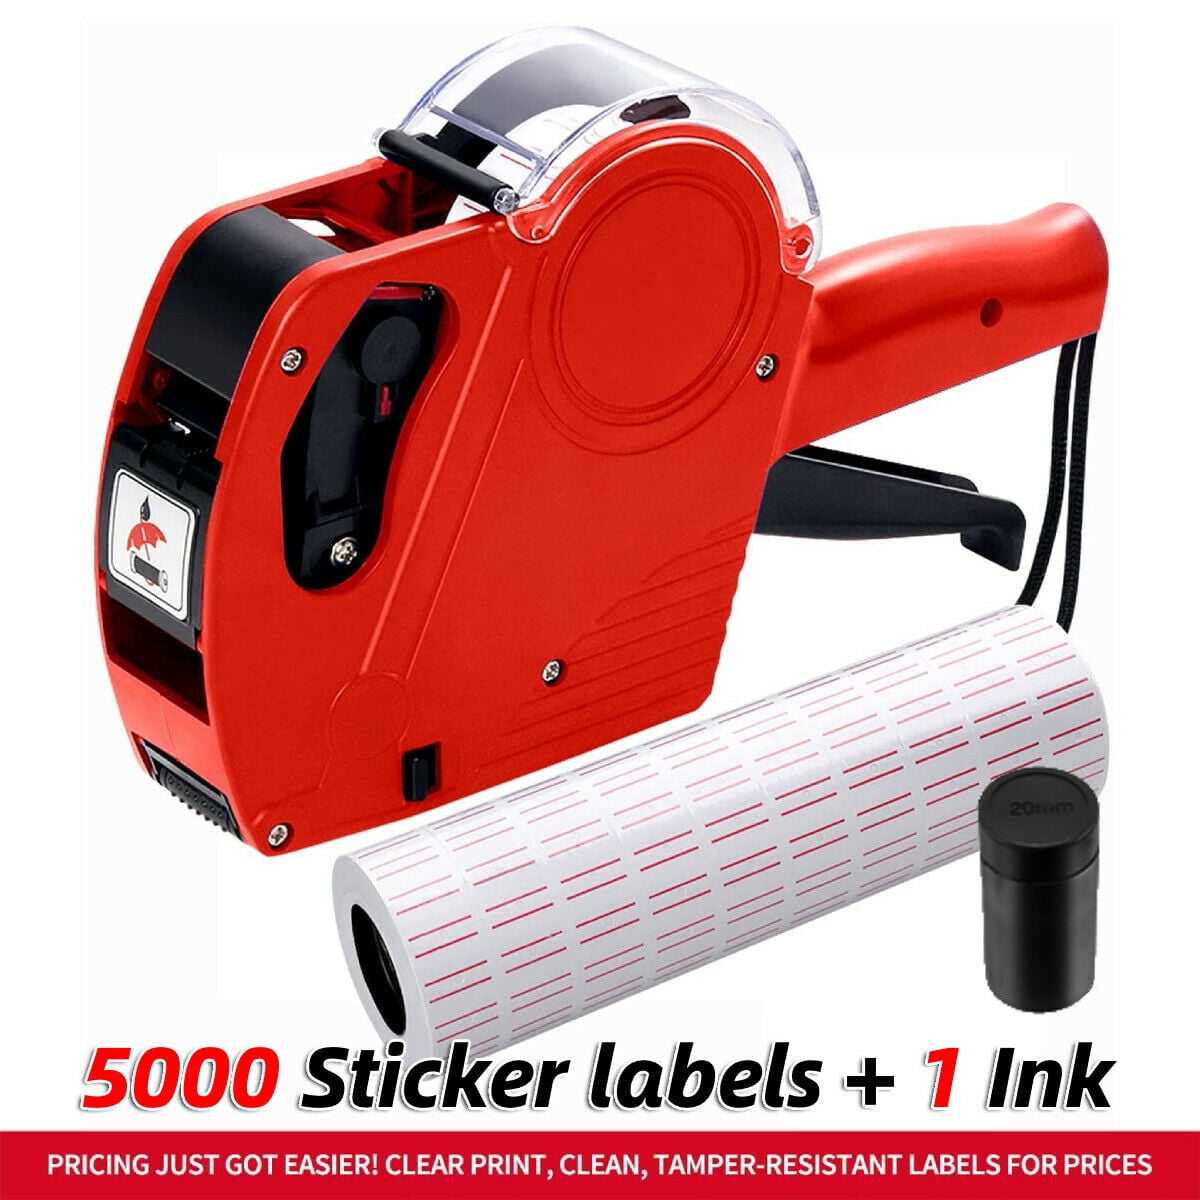 10 Rolls 6000pcs White Price Tag Sticker Gun Labels Refill For MX 5500 w/ 1 ink 